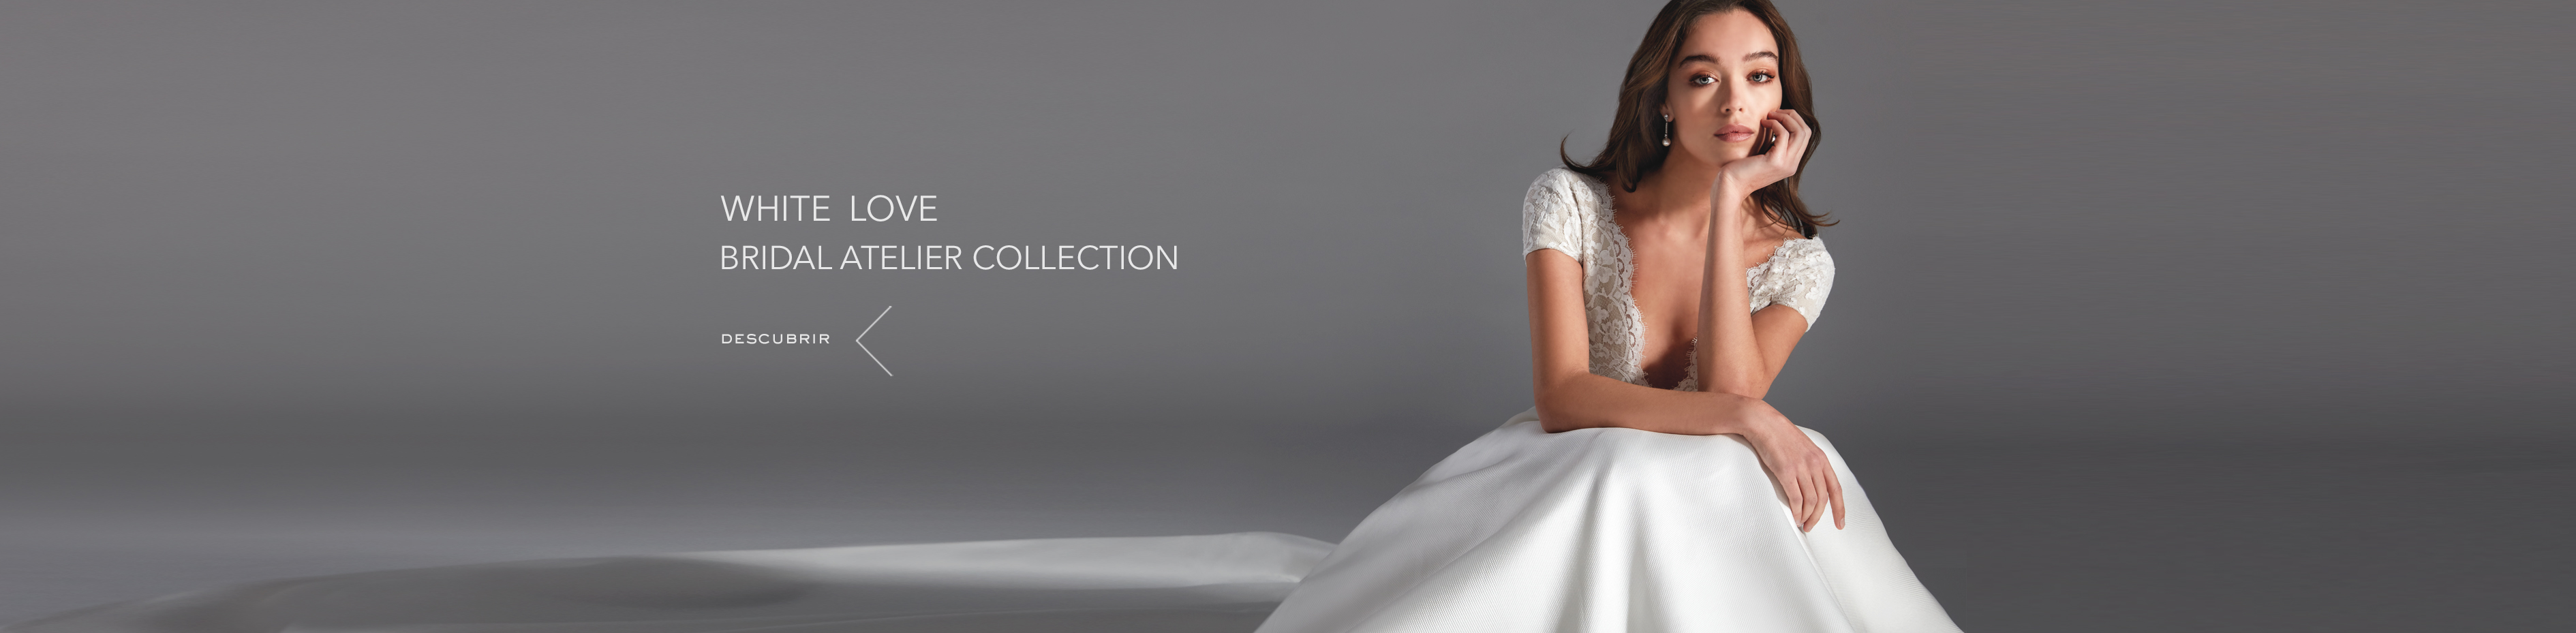 WHITE LOVE / ATELIER BRIDAL COLLECTION